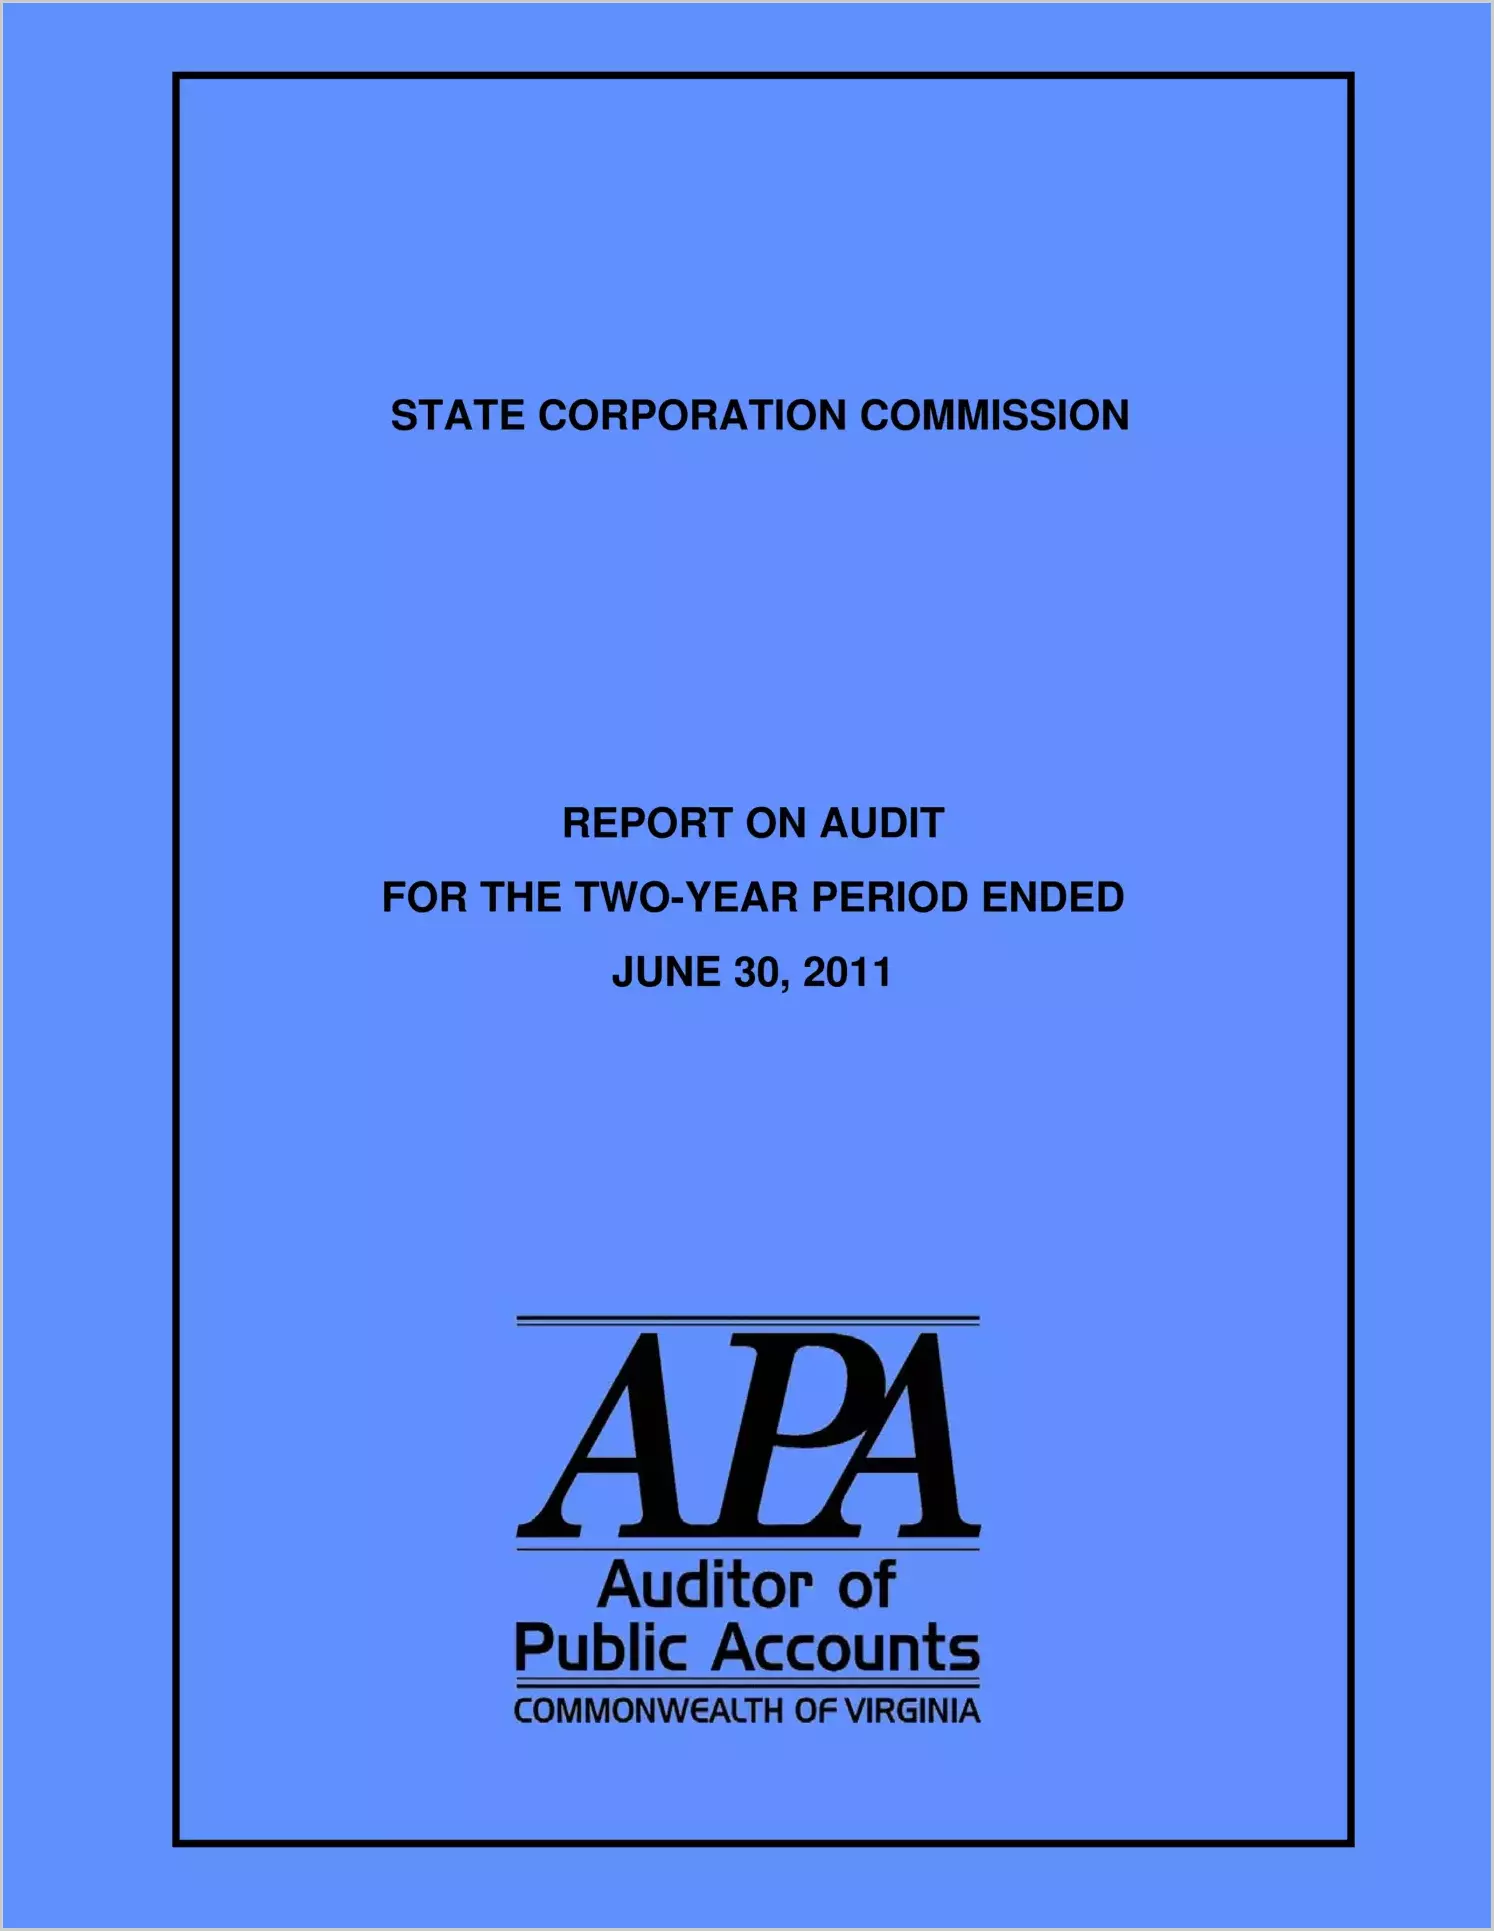 State Corporation Commission for the two-year period ended June 30, 2011